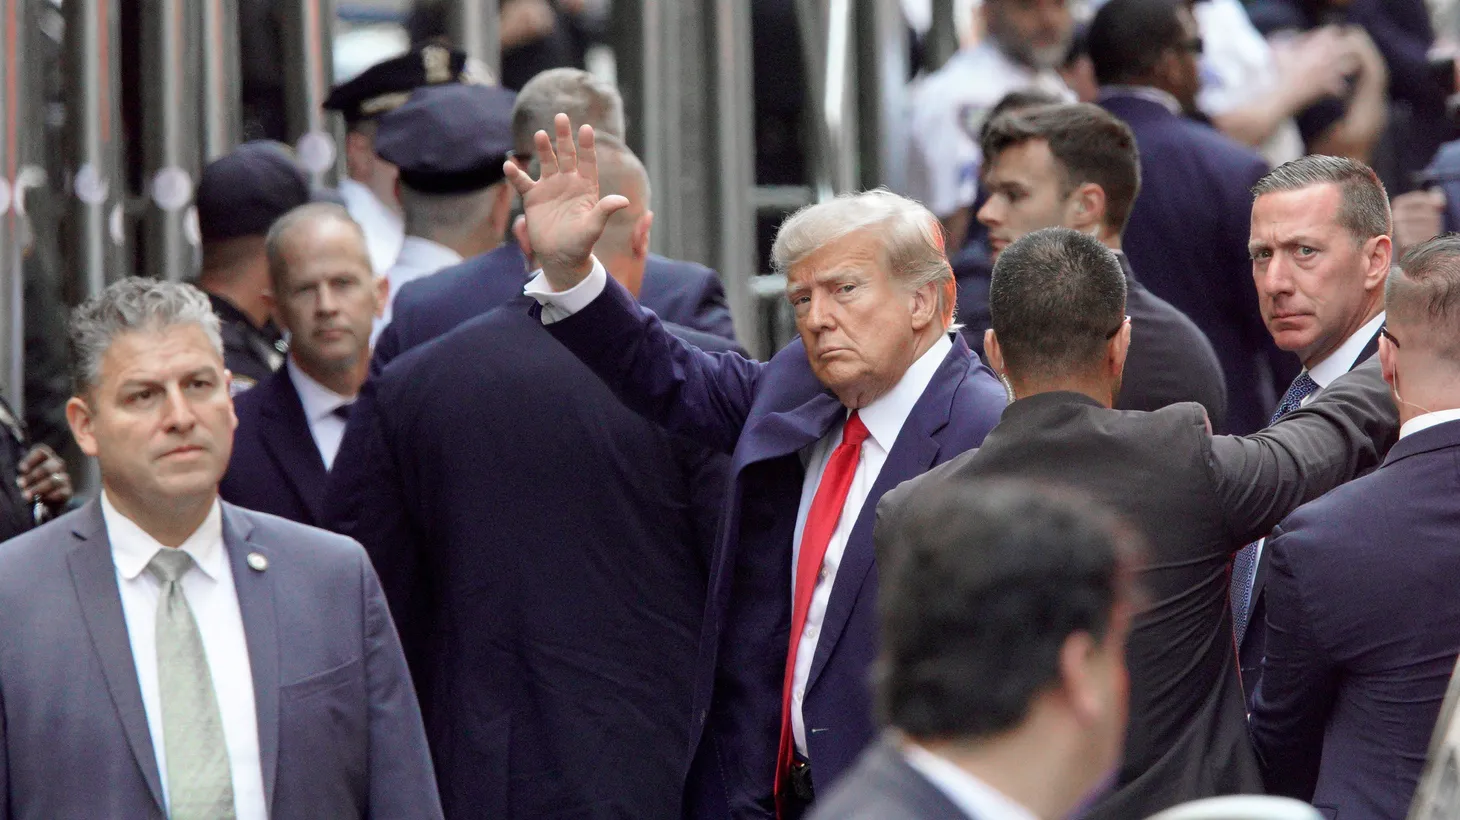 Former U.S. President Donald Trump arrives at Manhattan Criminal Courthouse after his indictment by a Manhattan grand jury following a probe into hush money paid to porn star Stormy Daniels, in New York City, U.S., April 4, 2023.